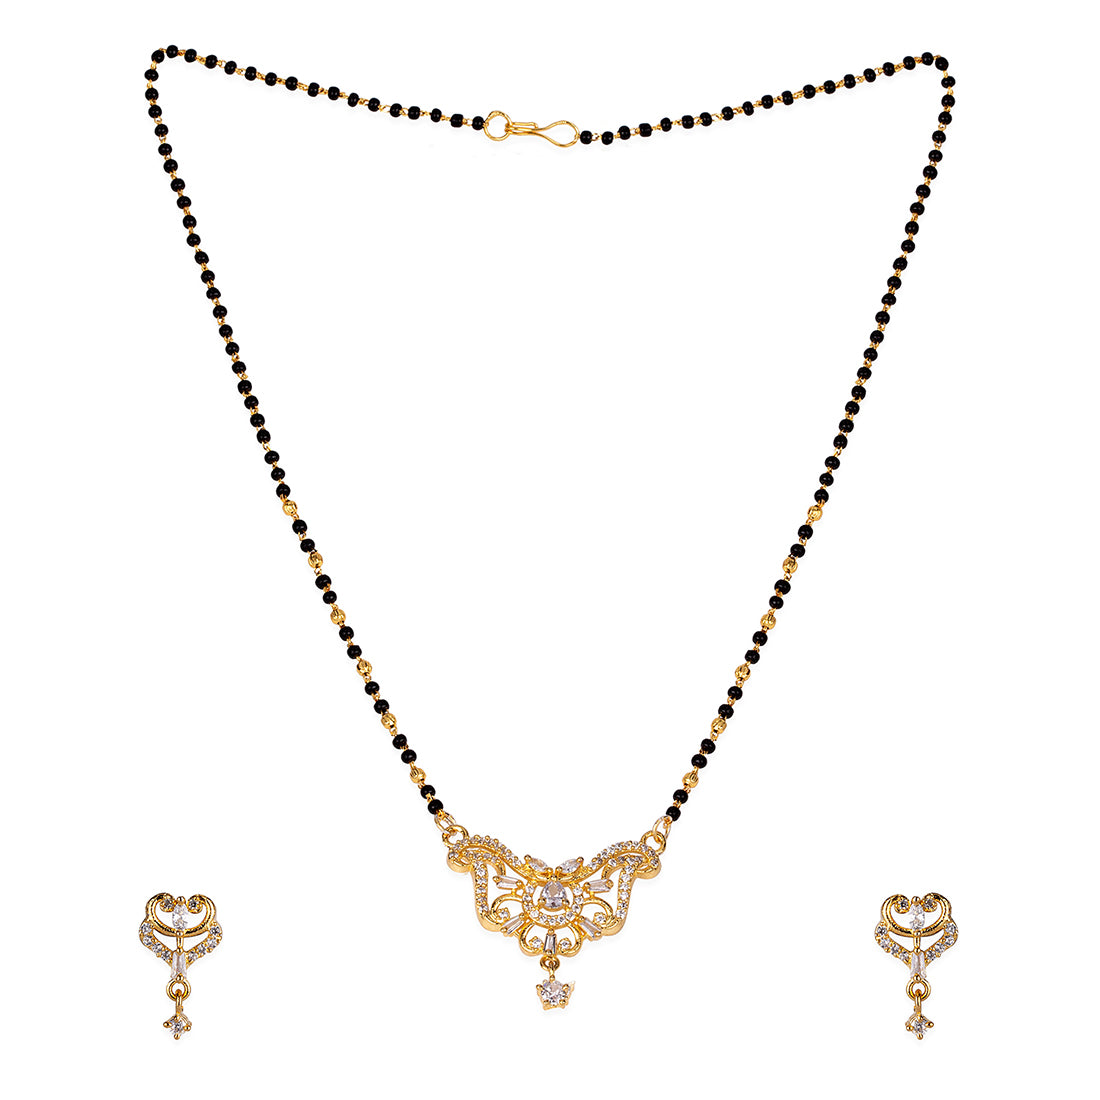 American Diamond CZ Traditional Golden Brass Black Beaded Mangalsutra with Earrings